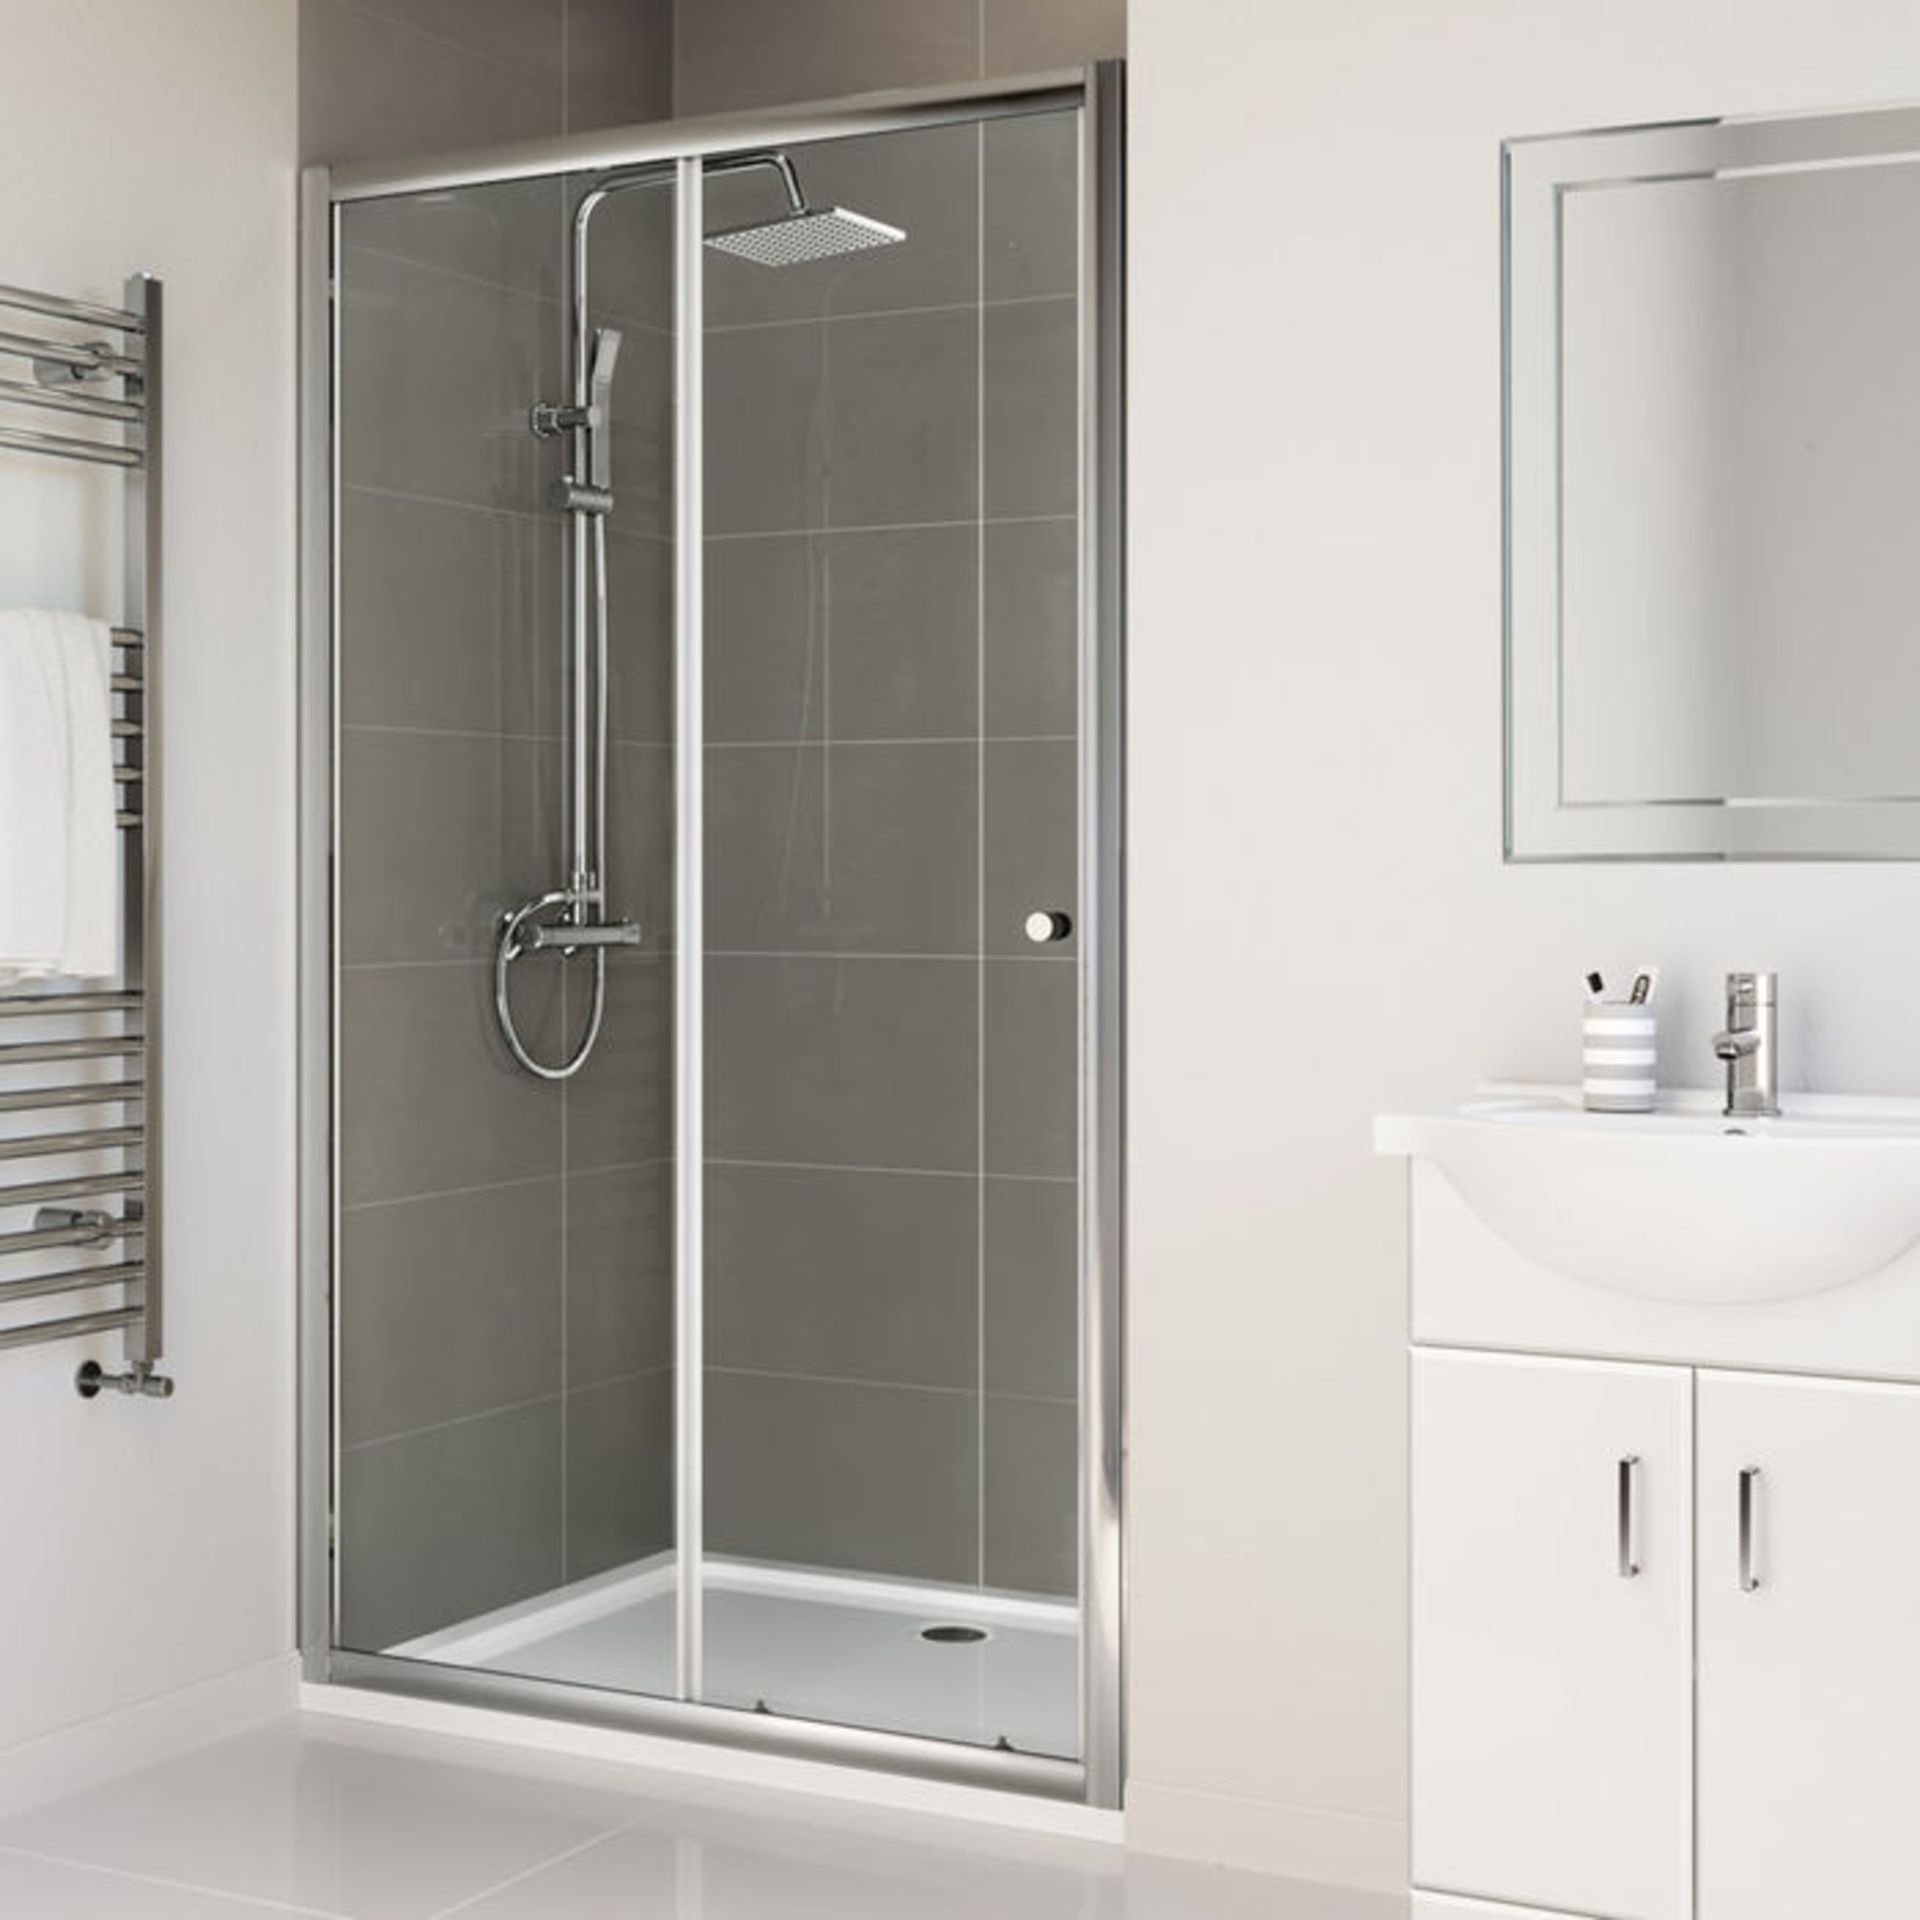 (PA148) 1200mm - Elements Sliding Shower Door. RRP £299.99. 4mm Safety Glass Fully waterproof tested